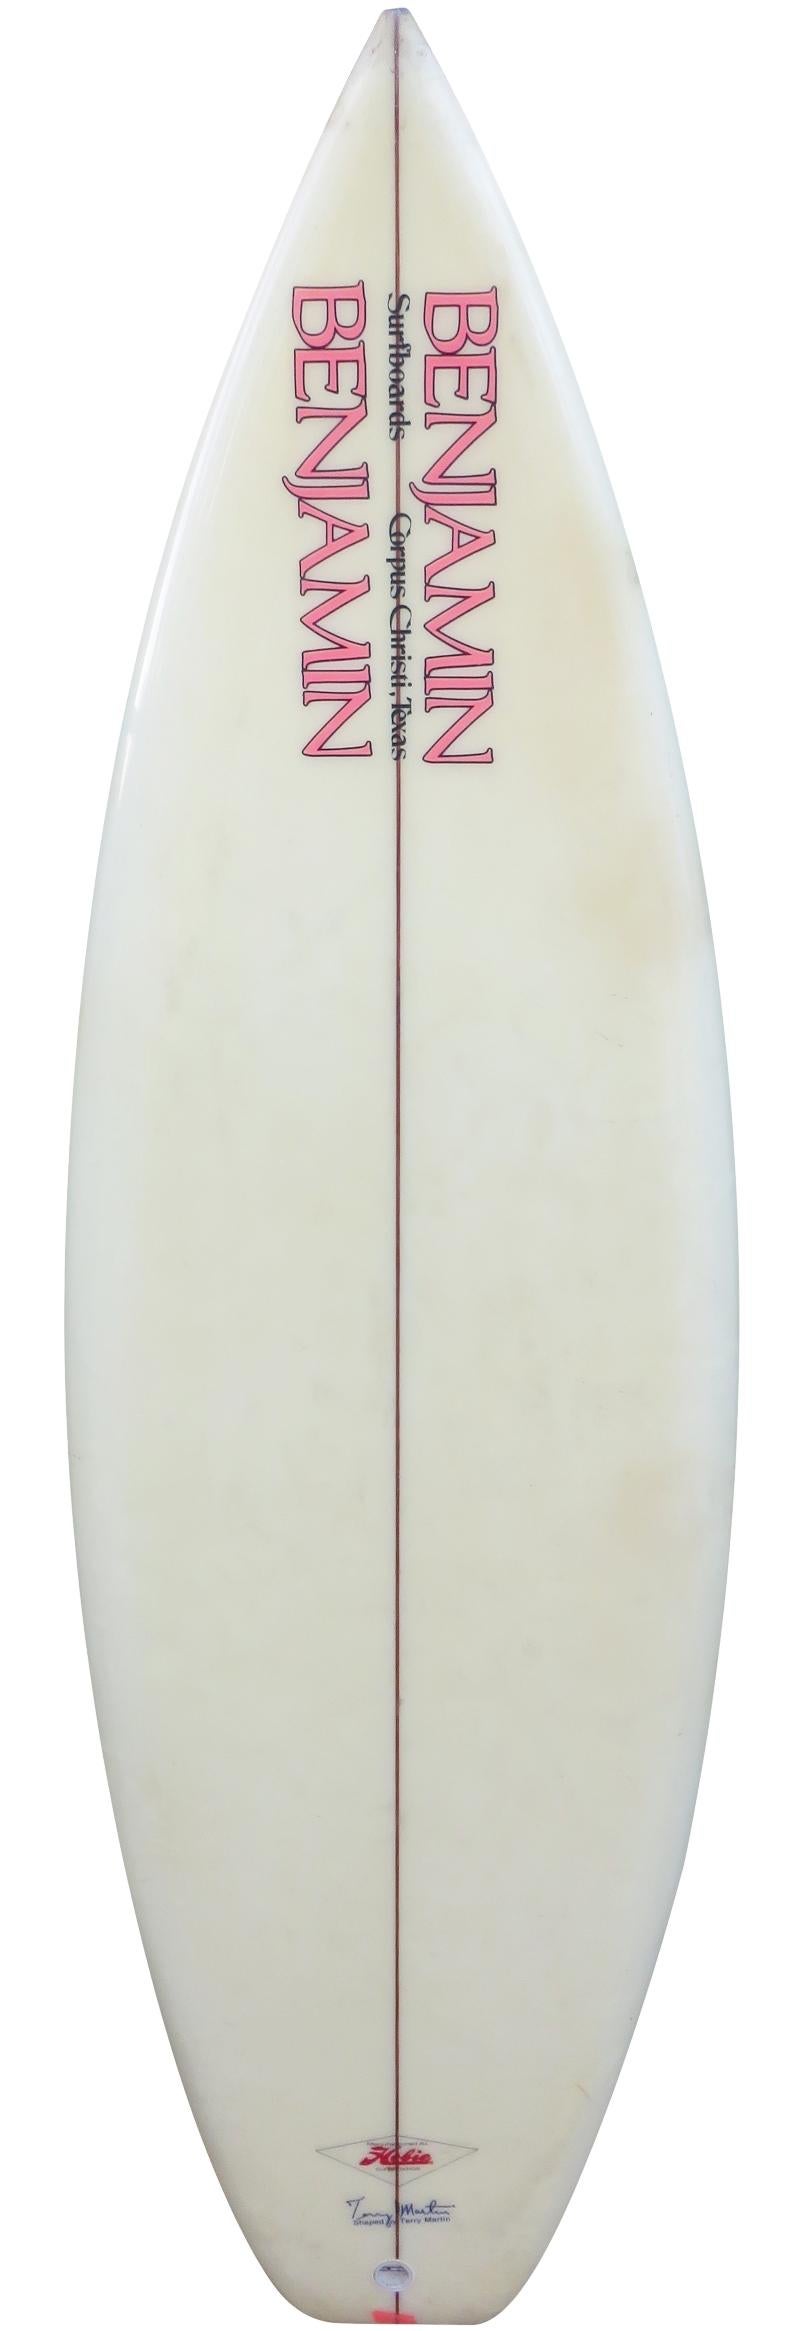 1980s vintage Benjamin thruster surfboard shaped by the late Terry Martin (1937-2012). Features a vibrant Martin 